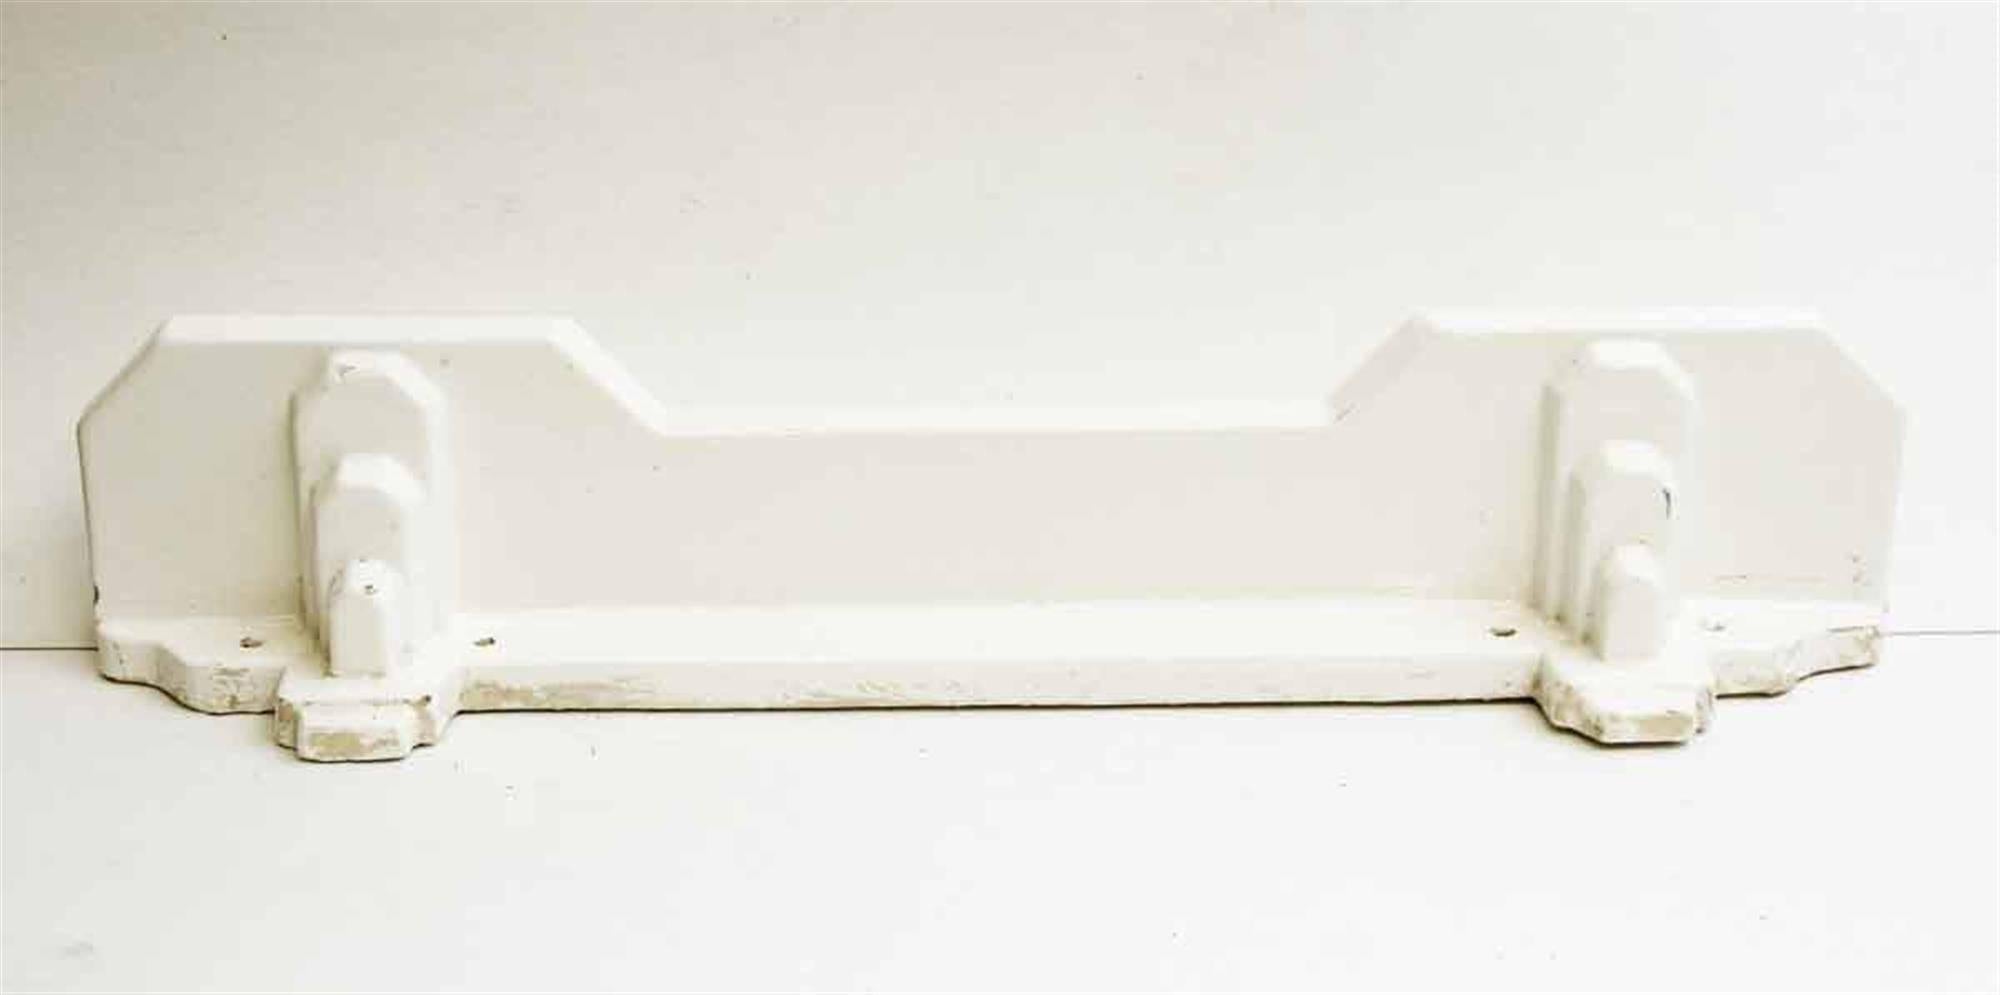 Reclaimed 1970s French ceramic Art Deco style bathroom wall shelf with a white porcelain finish. Some surface wear from age. This can be seen at our 400 Gilligan St location in Scranton, PA.